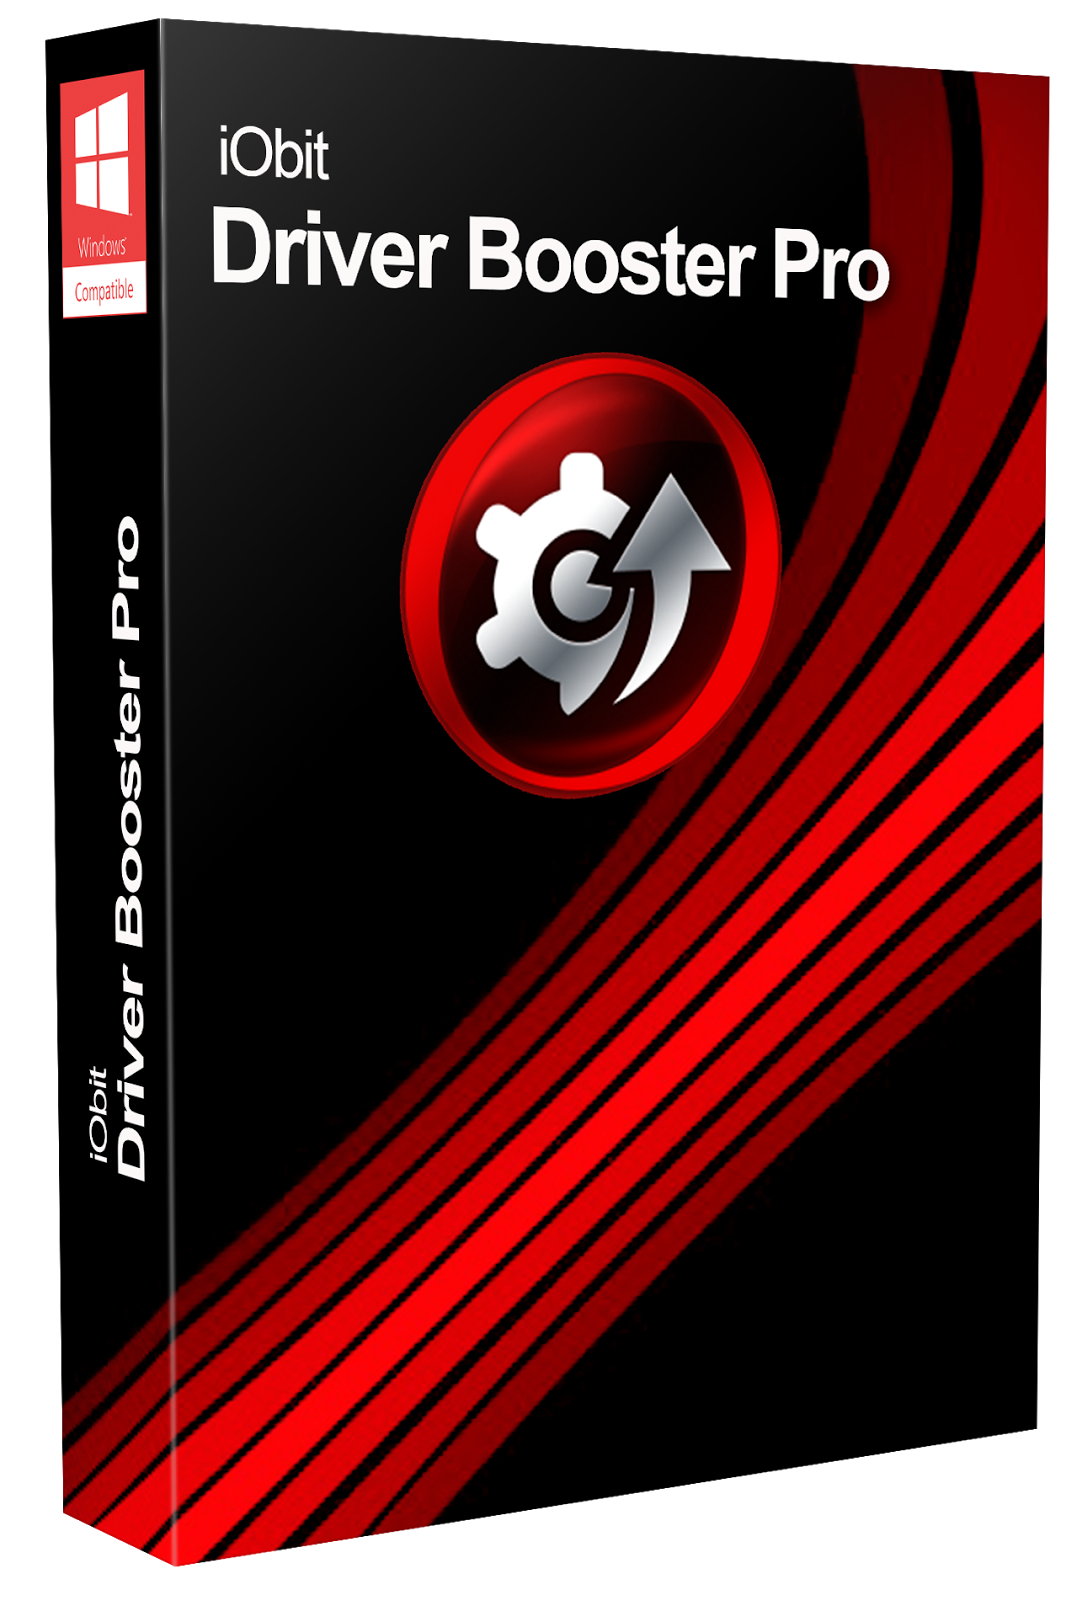 Driver Booster. IOBIT Driver Booster Pro. Driver Booster Pro 8. Driver Booster Pro 9.